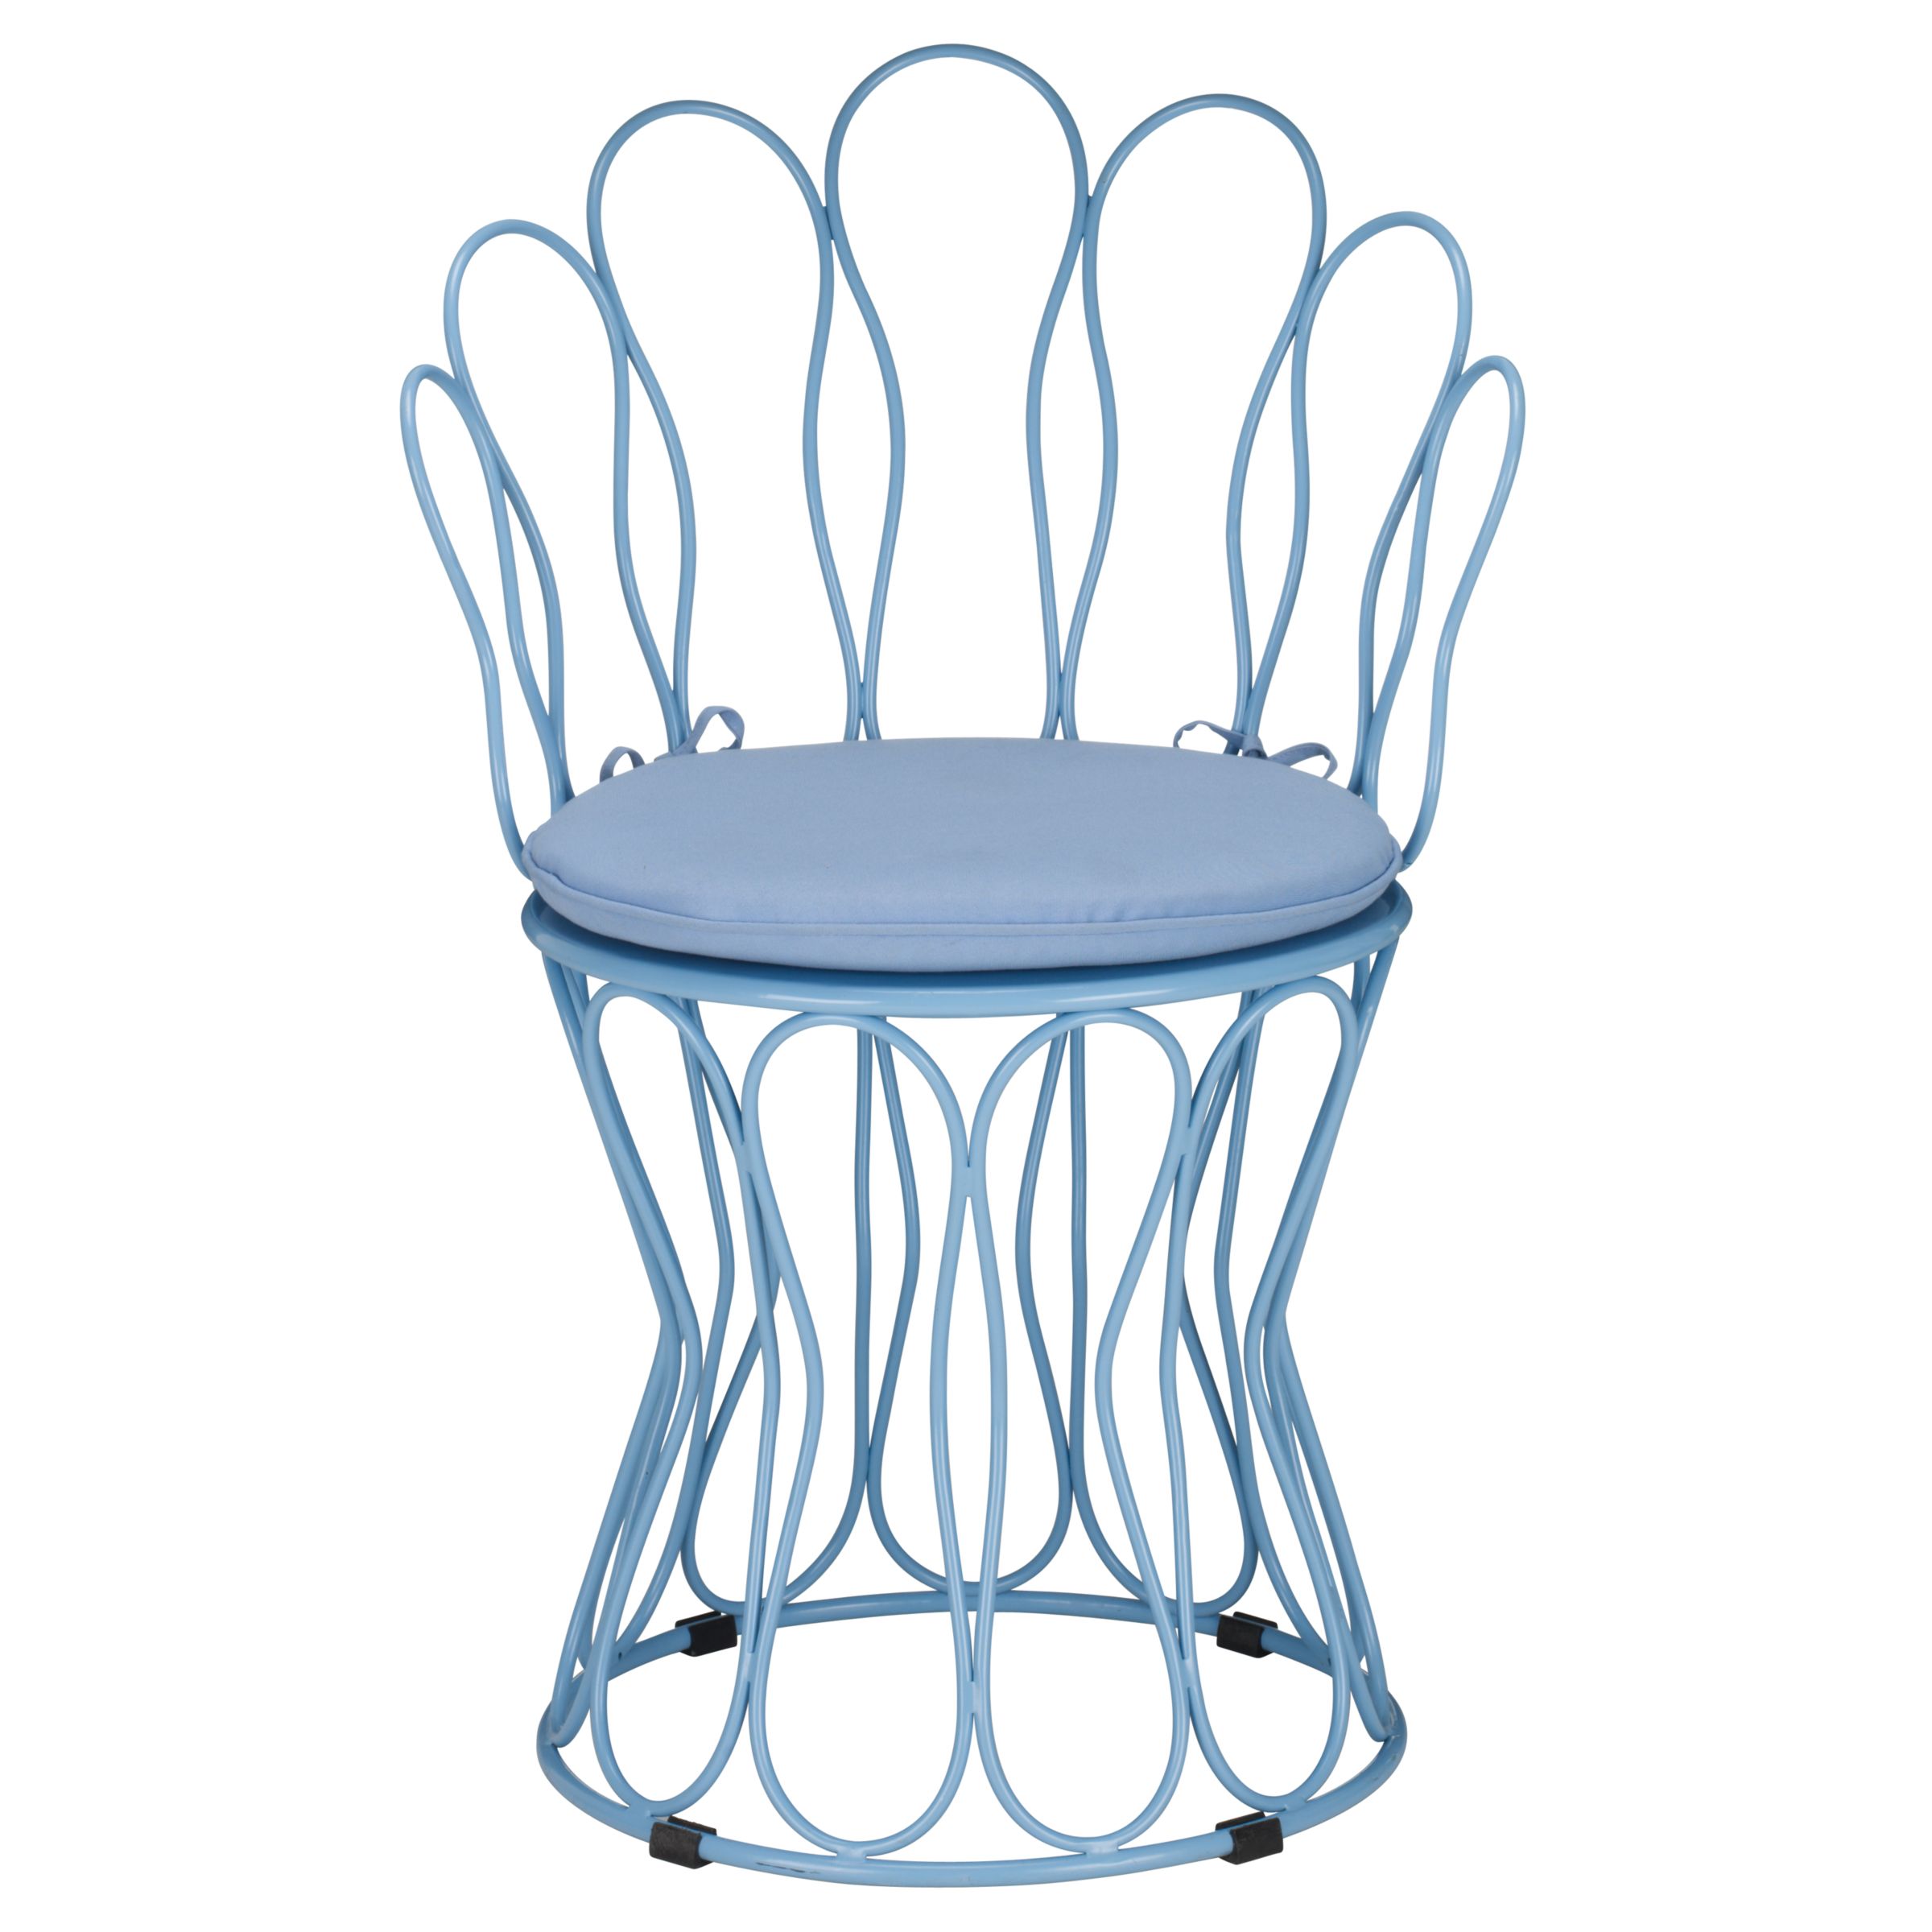 John Lewis Florence Outdoor Bistro Chair, Wedgwood